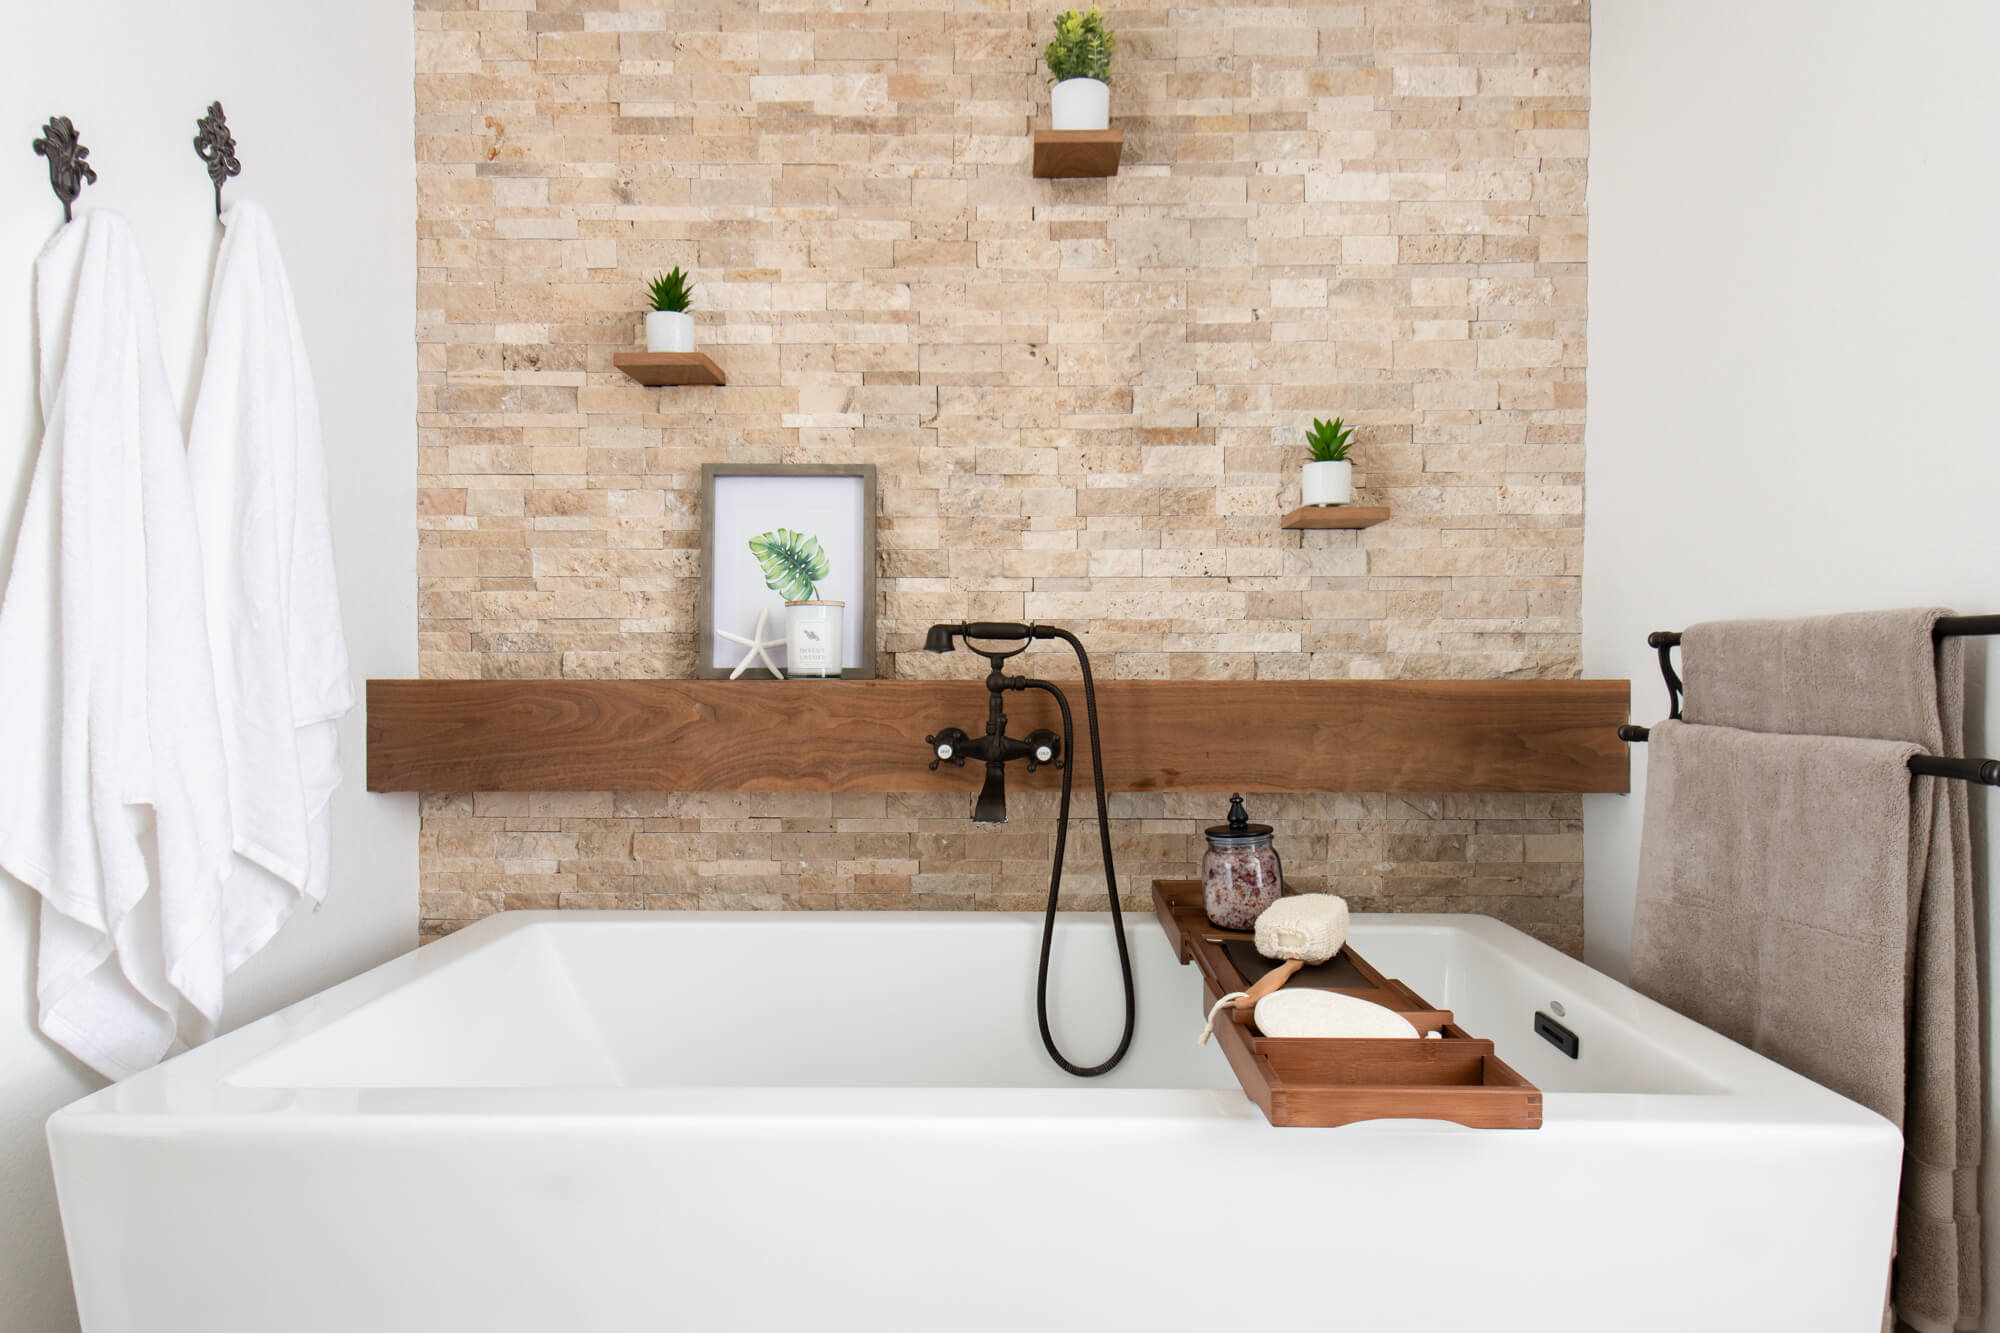 Spa Like Bathroom Remodel with Stone Accent Wall - bring color into the bathroom